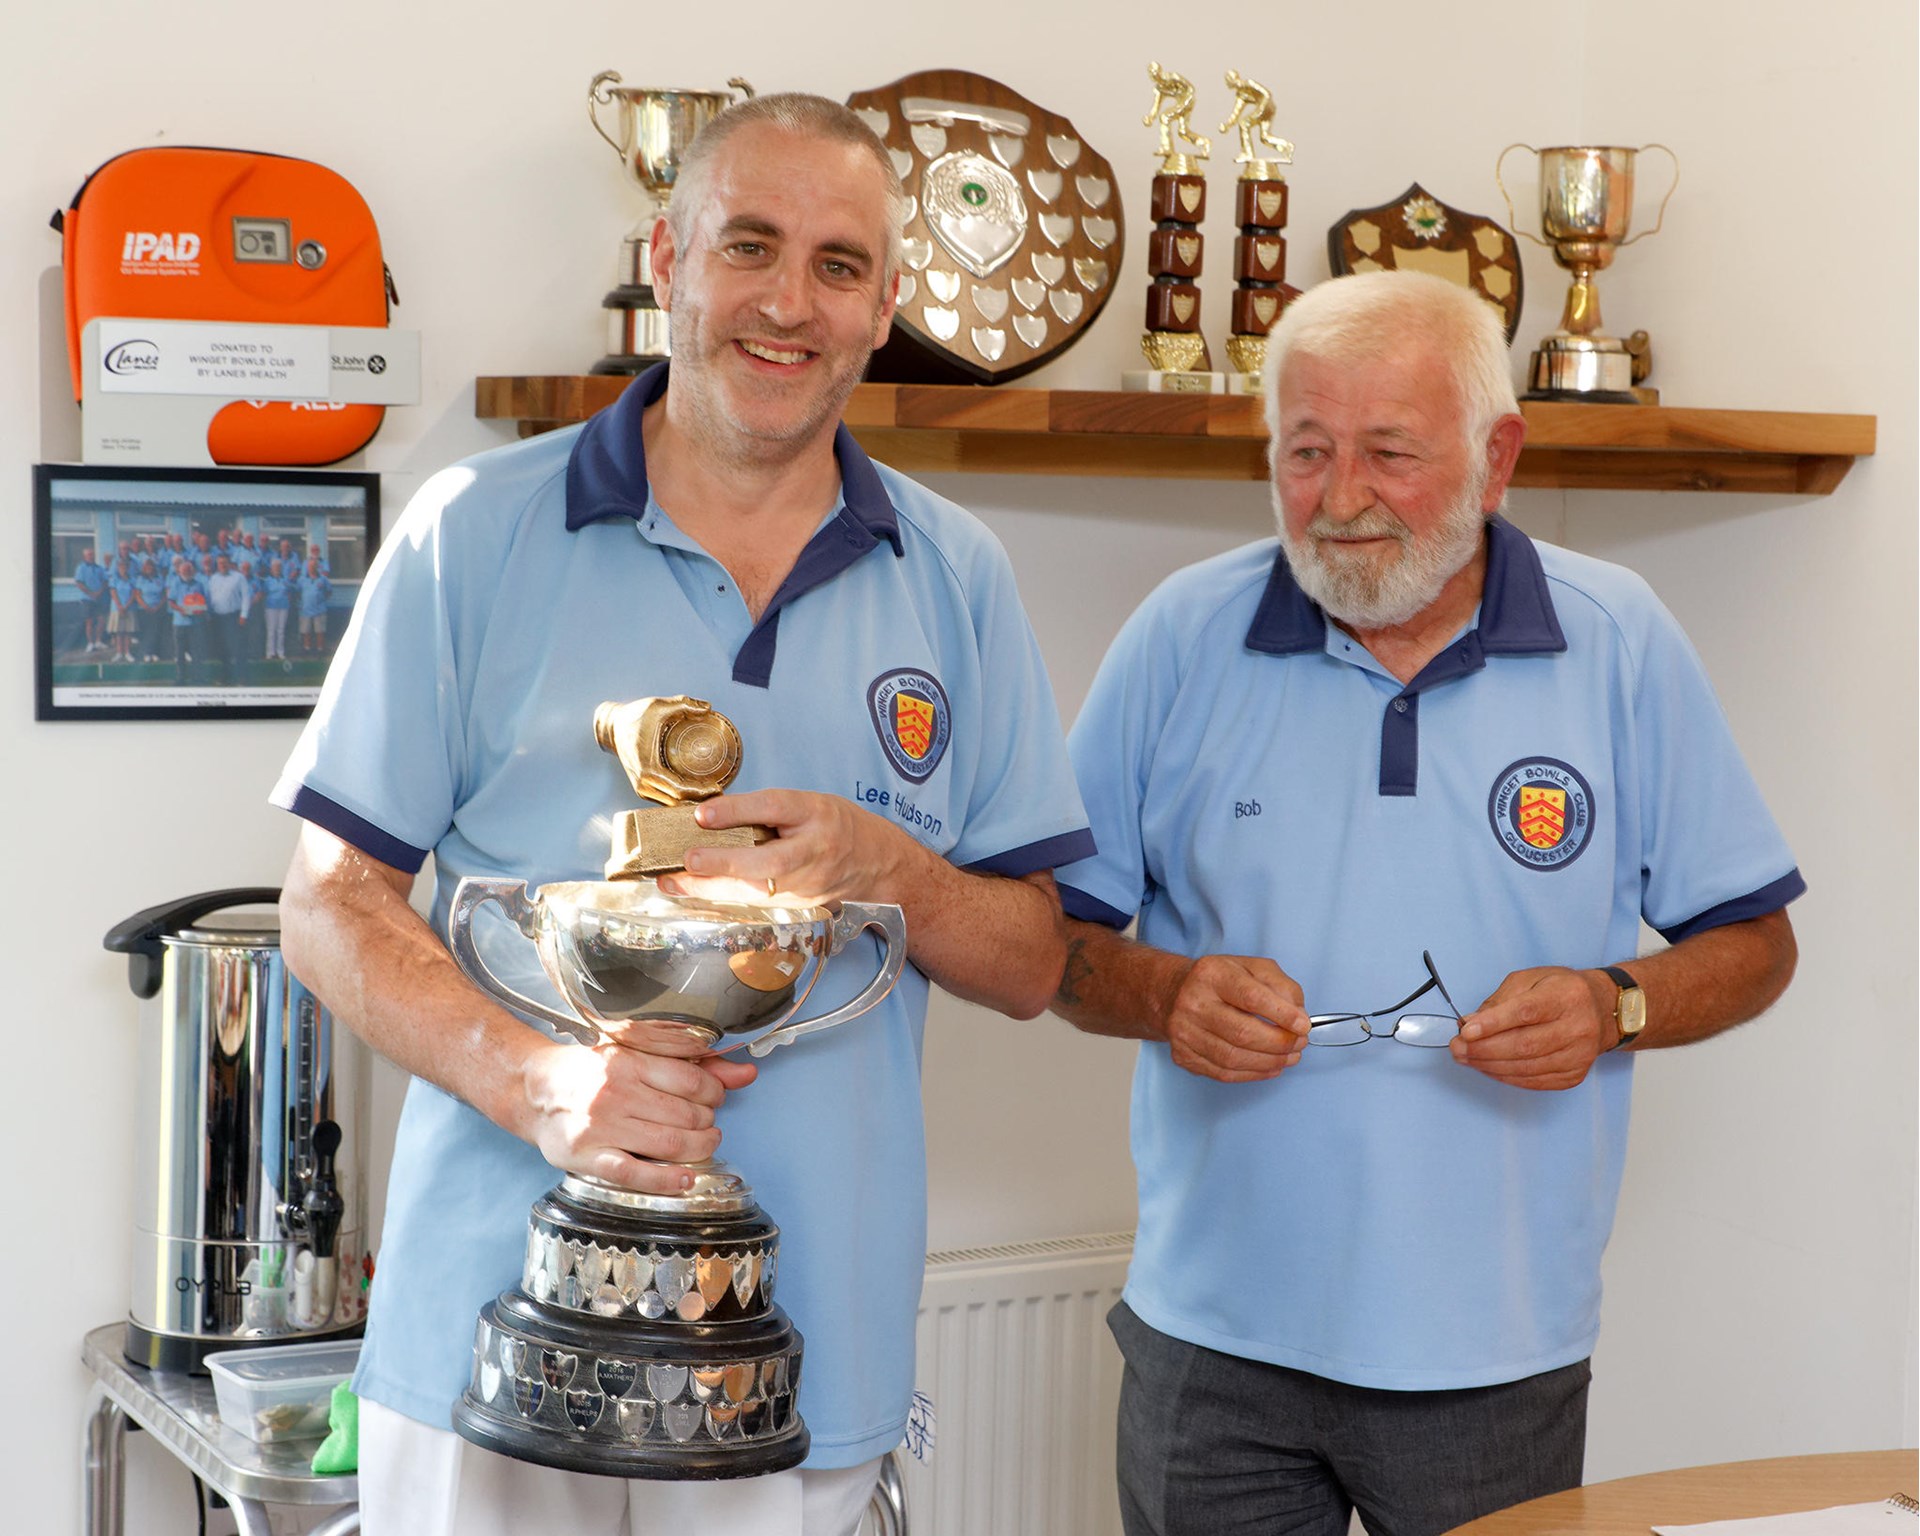 Lee Hudson won the Singles trophy. Seen here with the Club Captain, Bob Redding, who presented the trophies